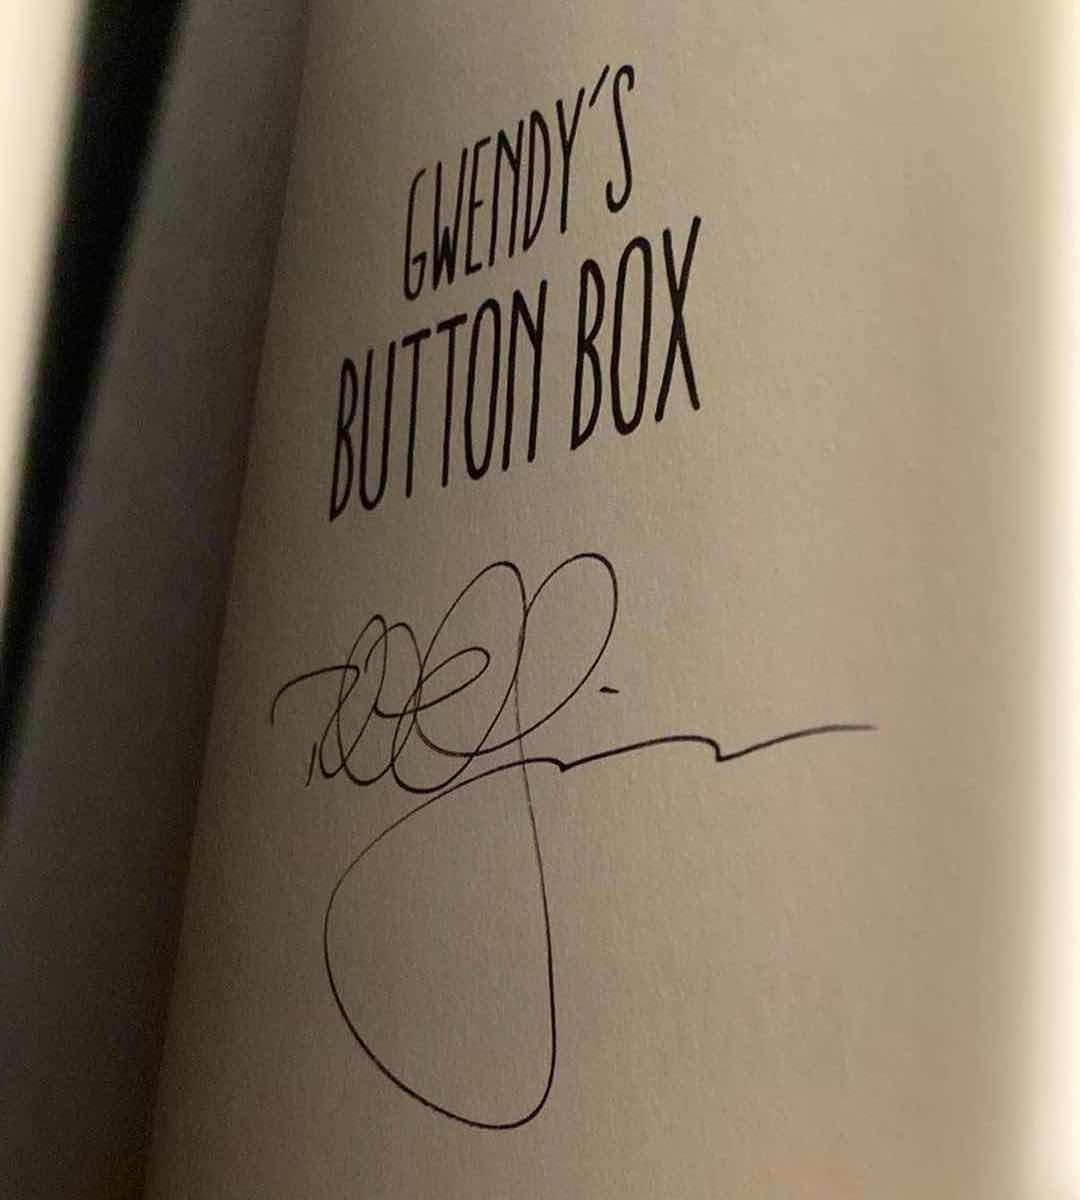 Photo 3 of STEPHEN KING & RICHARD CHIZMAR - GWENDY’S BUTTON BOX BOOK SIGNED BY RICHARD CHIZMAR